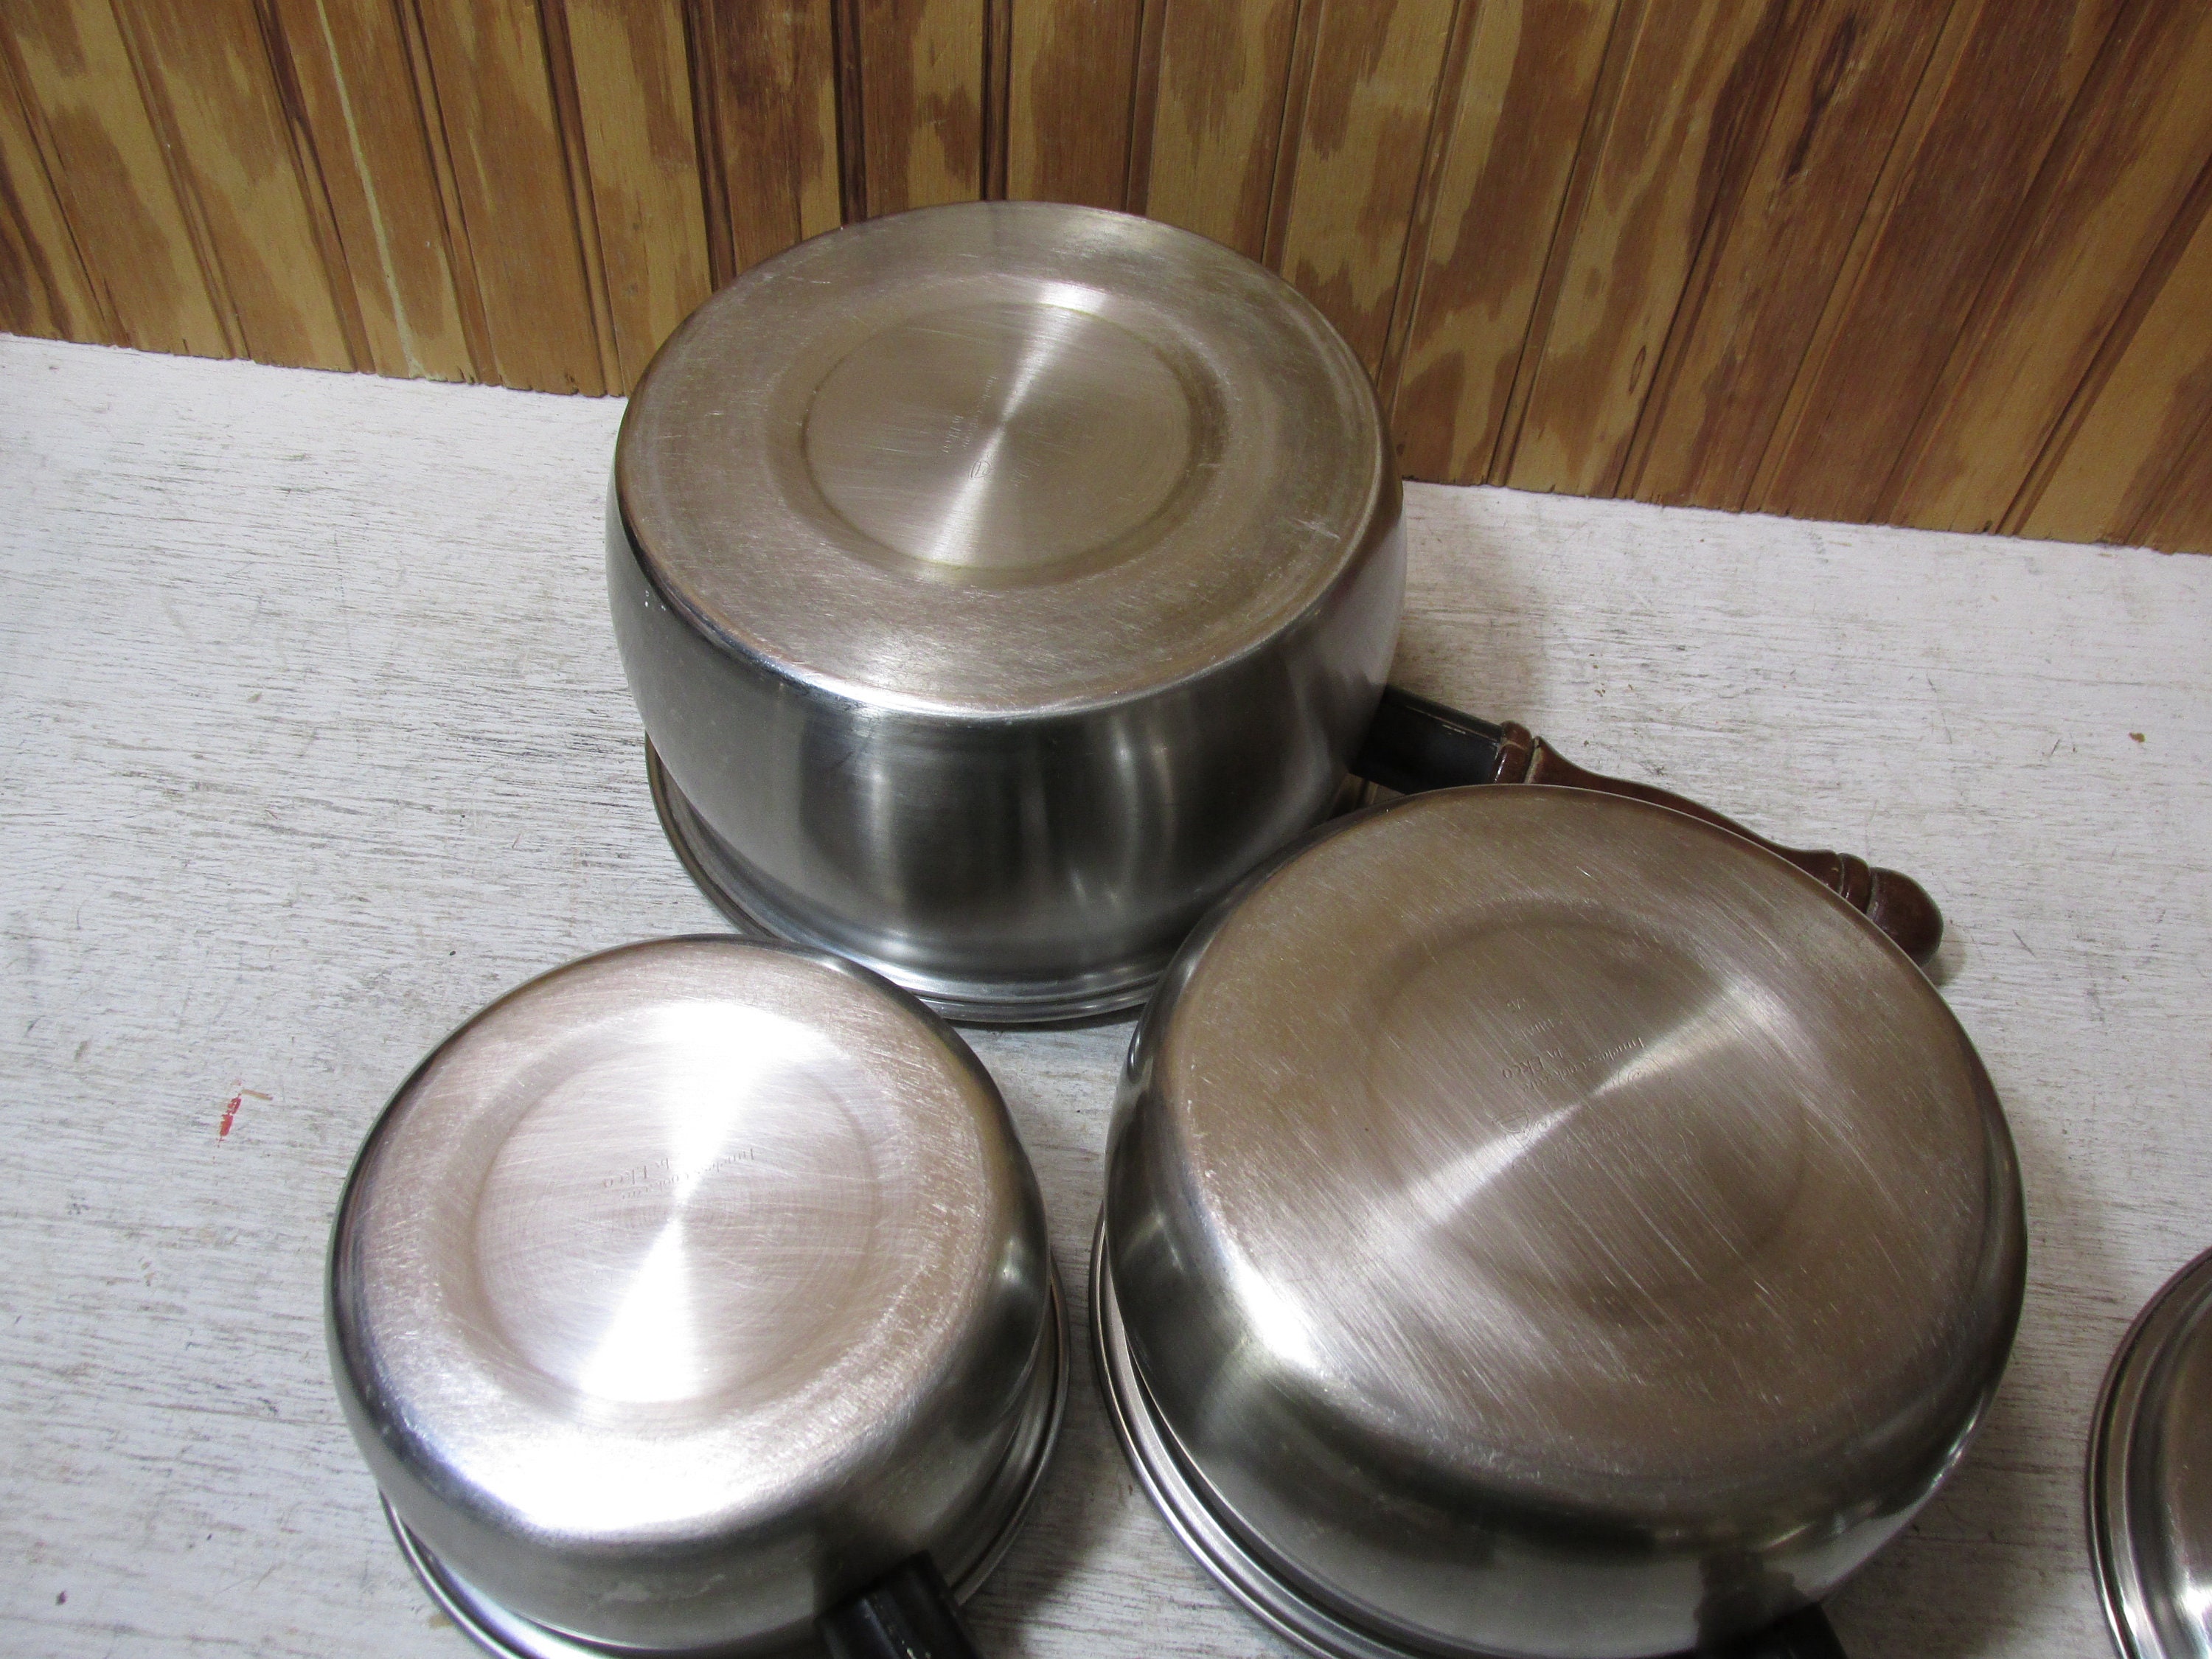 Vintage Stainless Steel Old Hampshire House Timeless Cookware by Ekco 1  Quart, 2 Quart and 3 Quart Pots With Lids Wooden Handles 